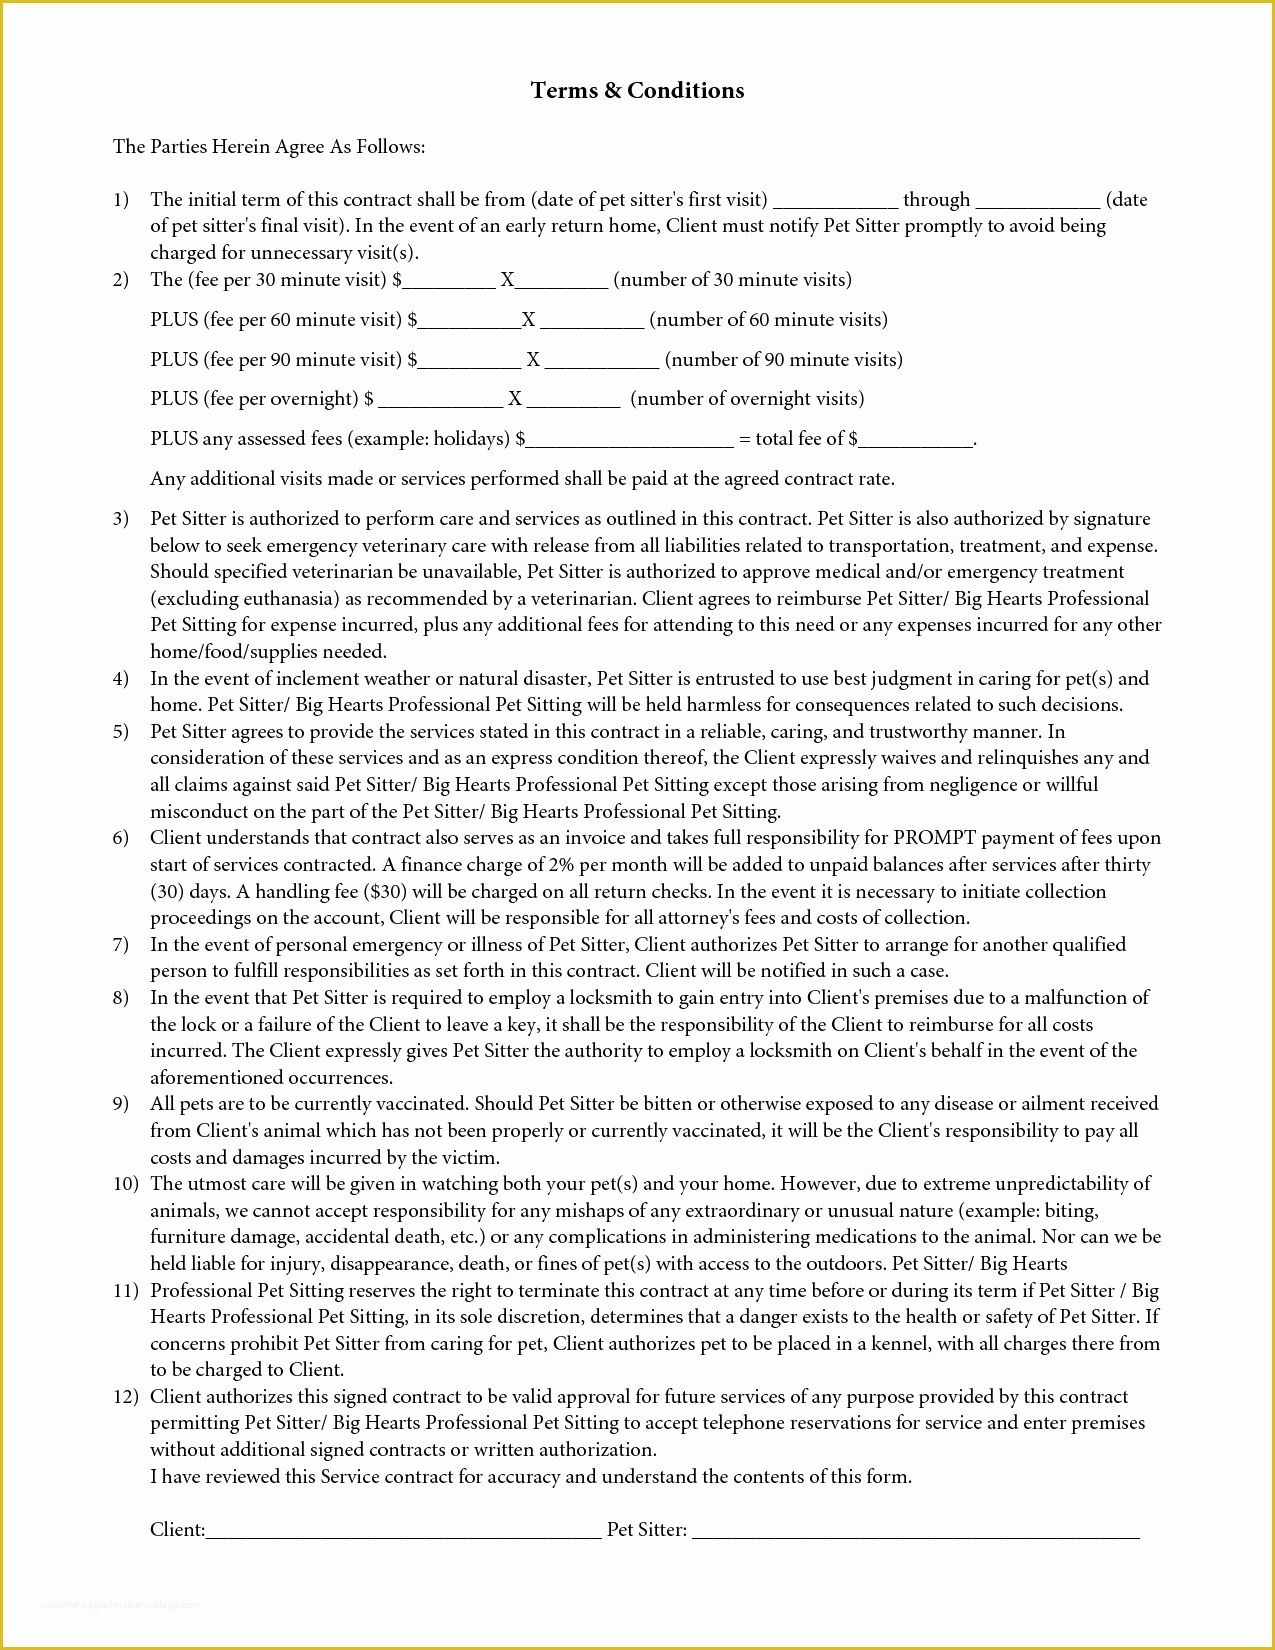 Free Dog Training Contract Template Of Pet Sitting Resume Sample Dogs